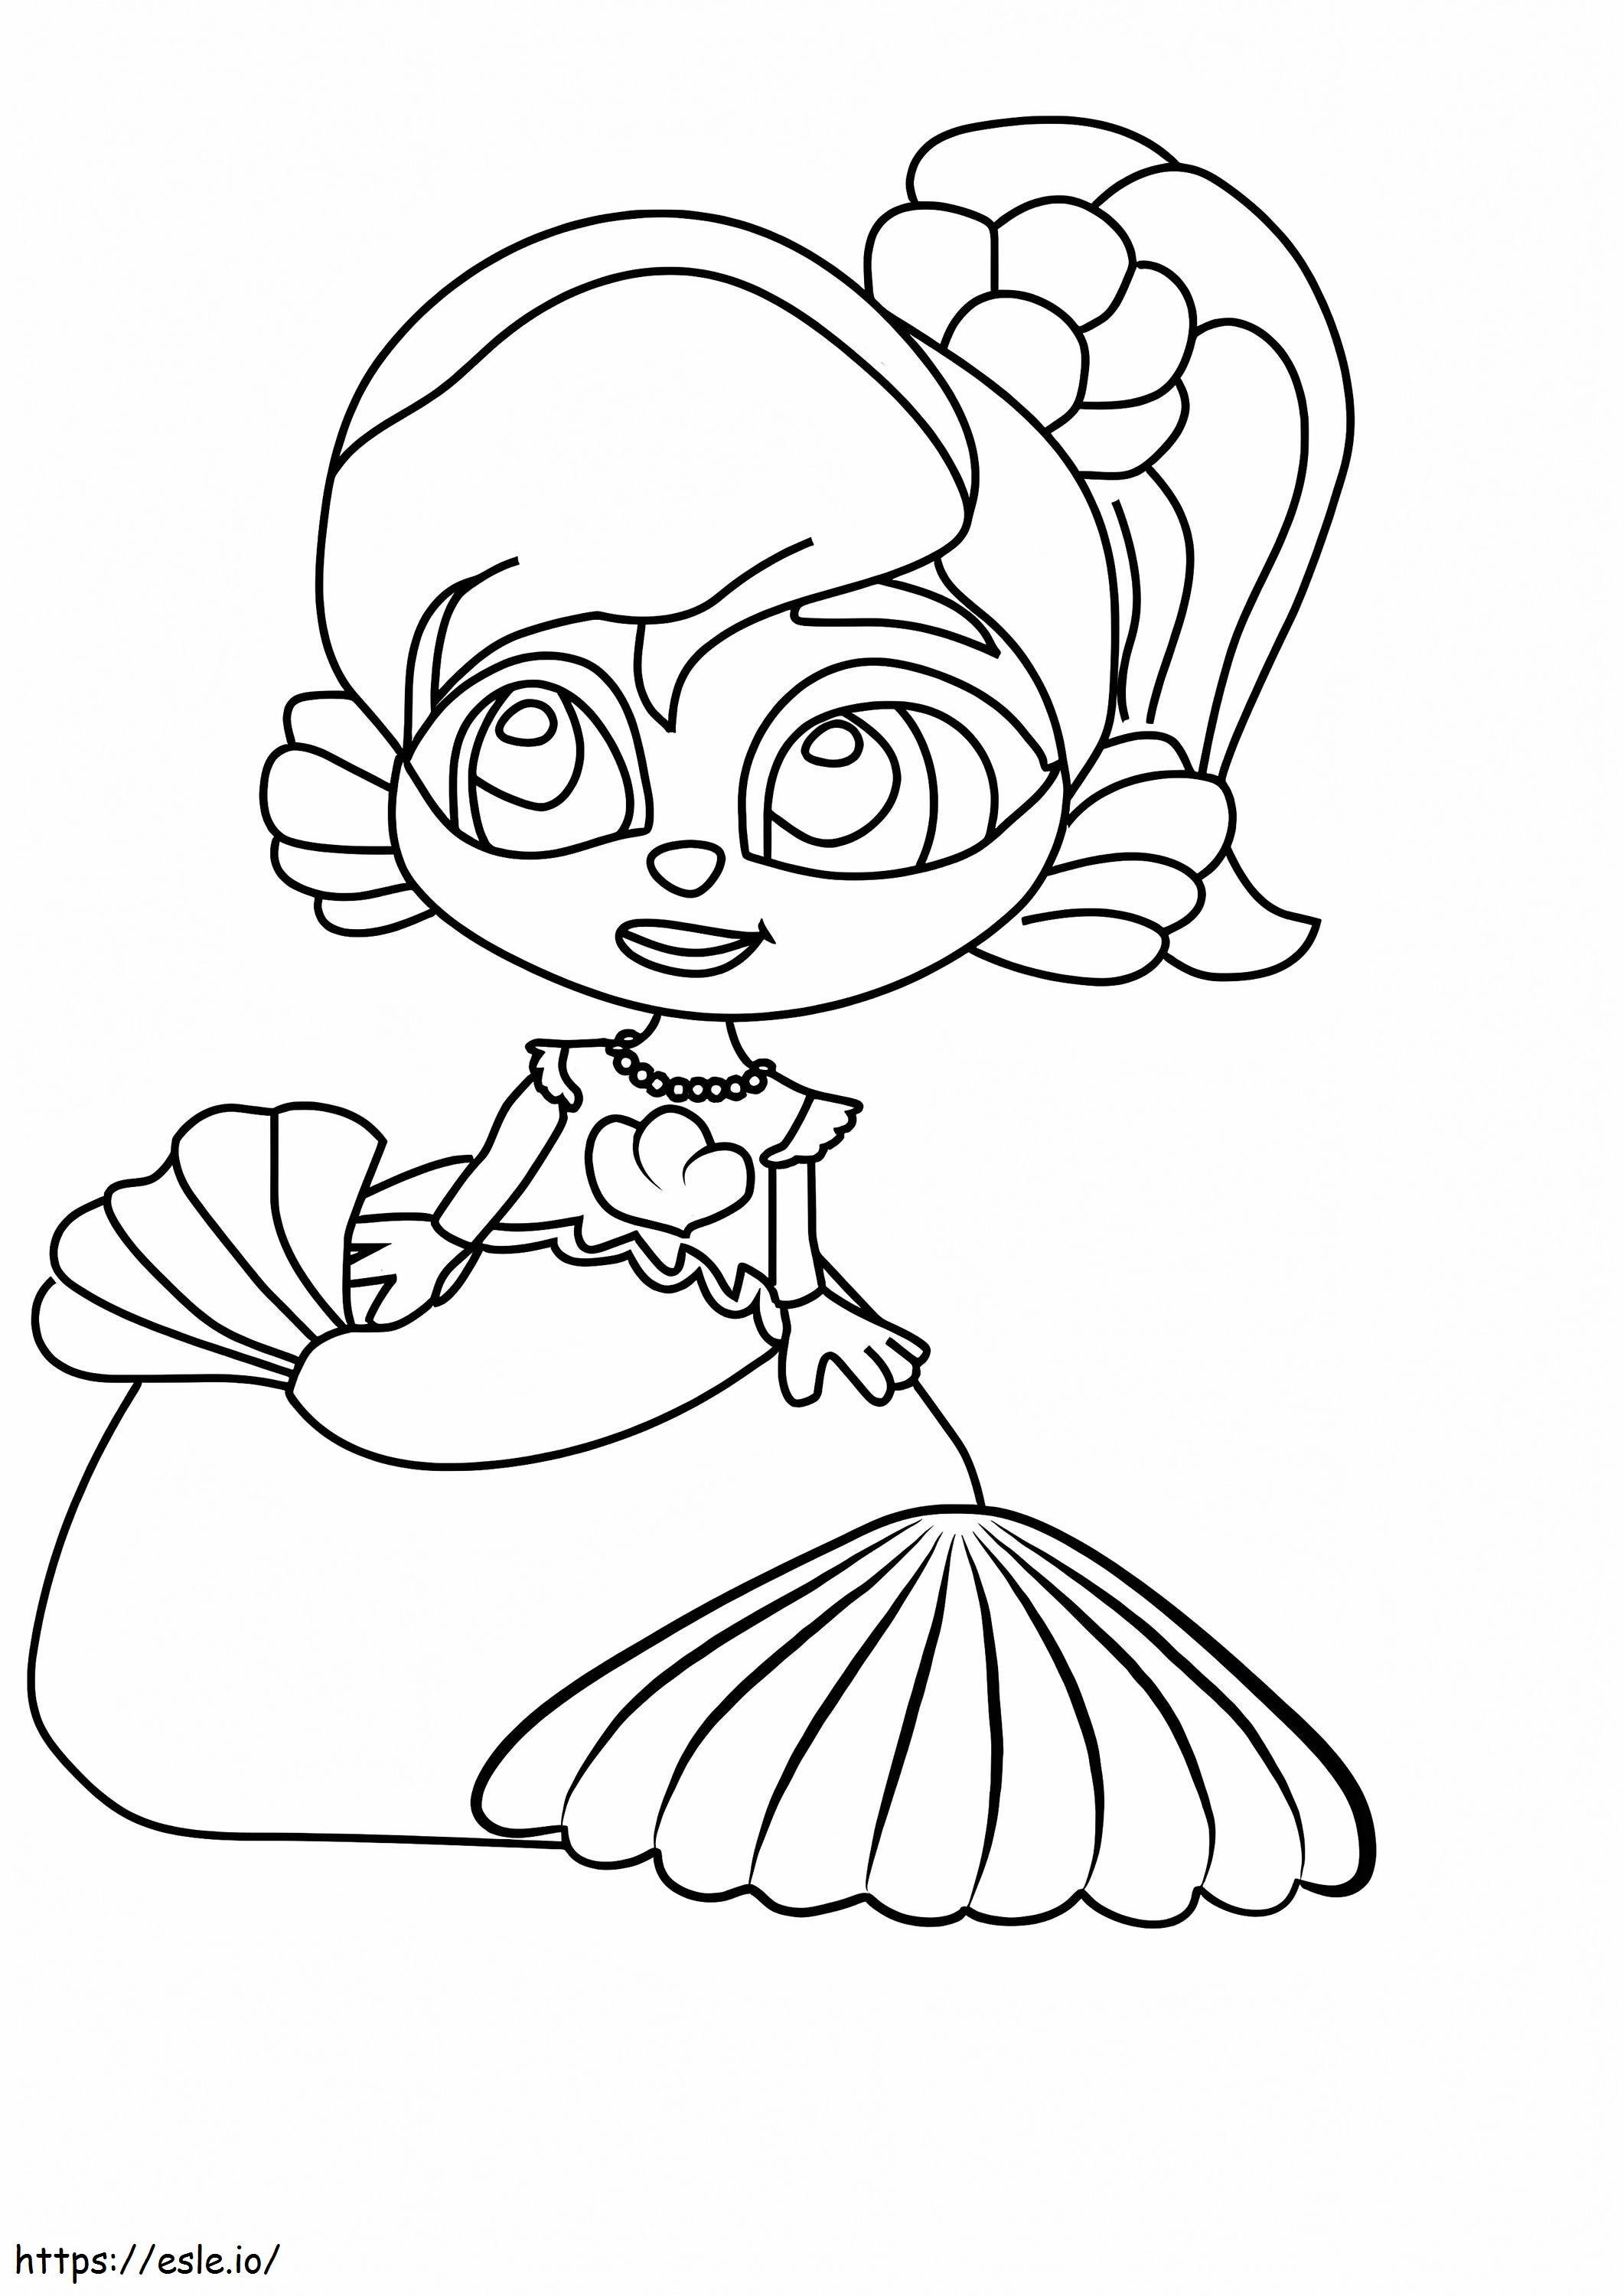 Melusine From Super Monstrosity coloring page